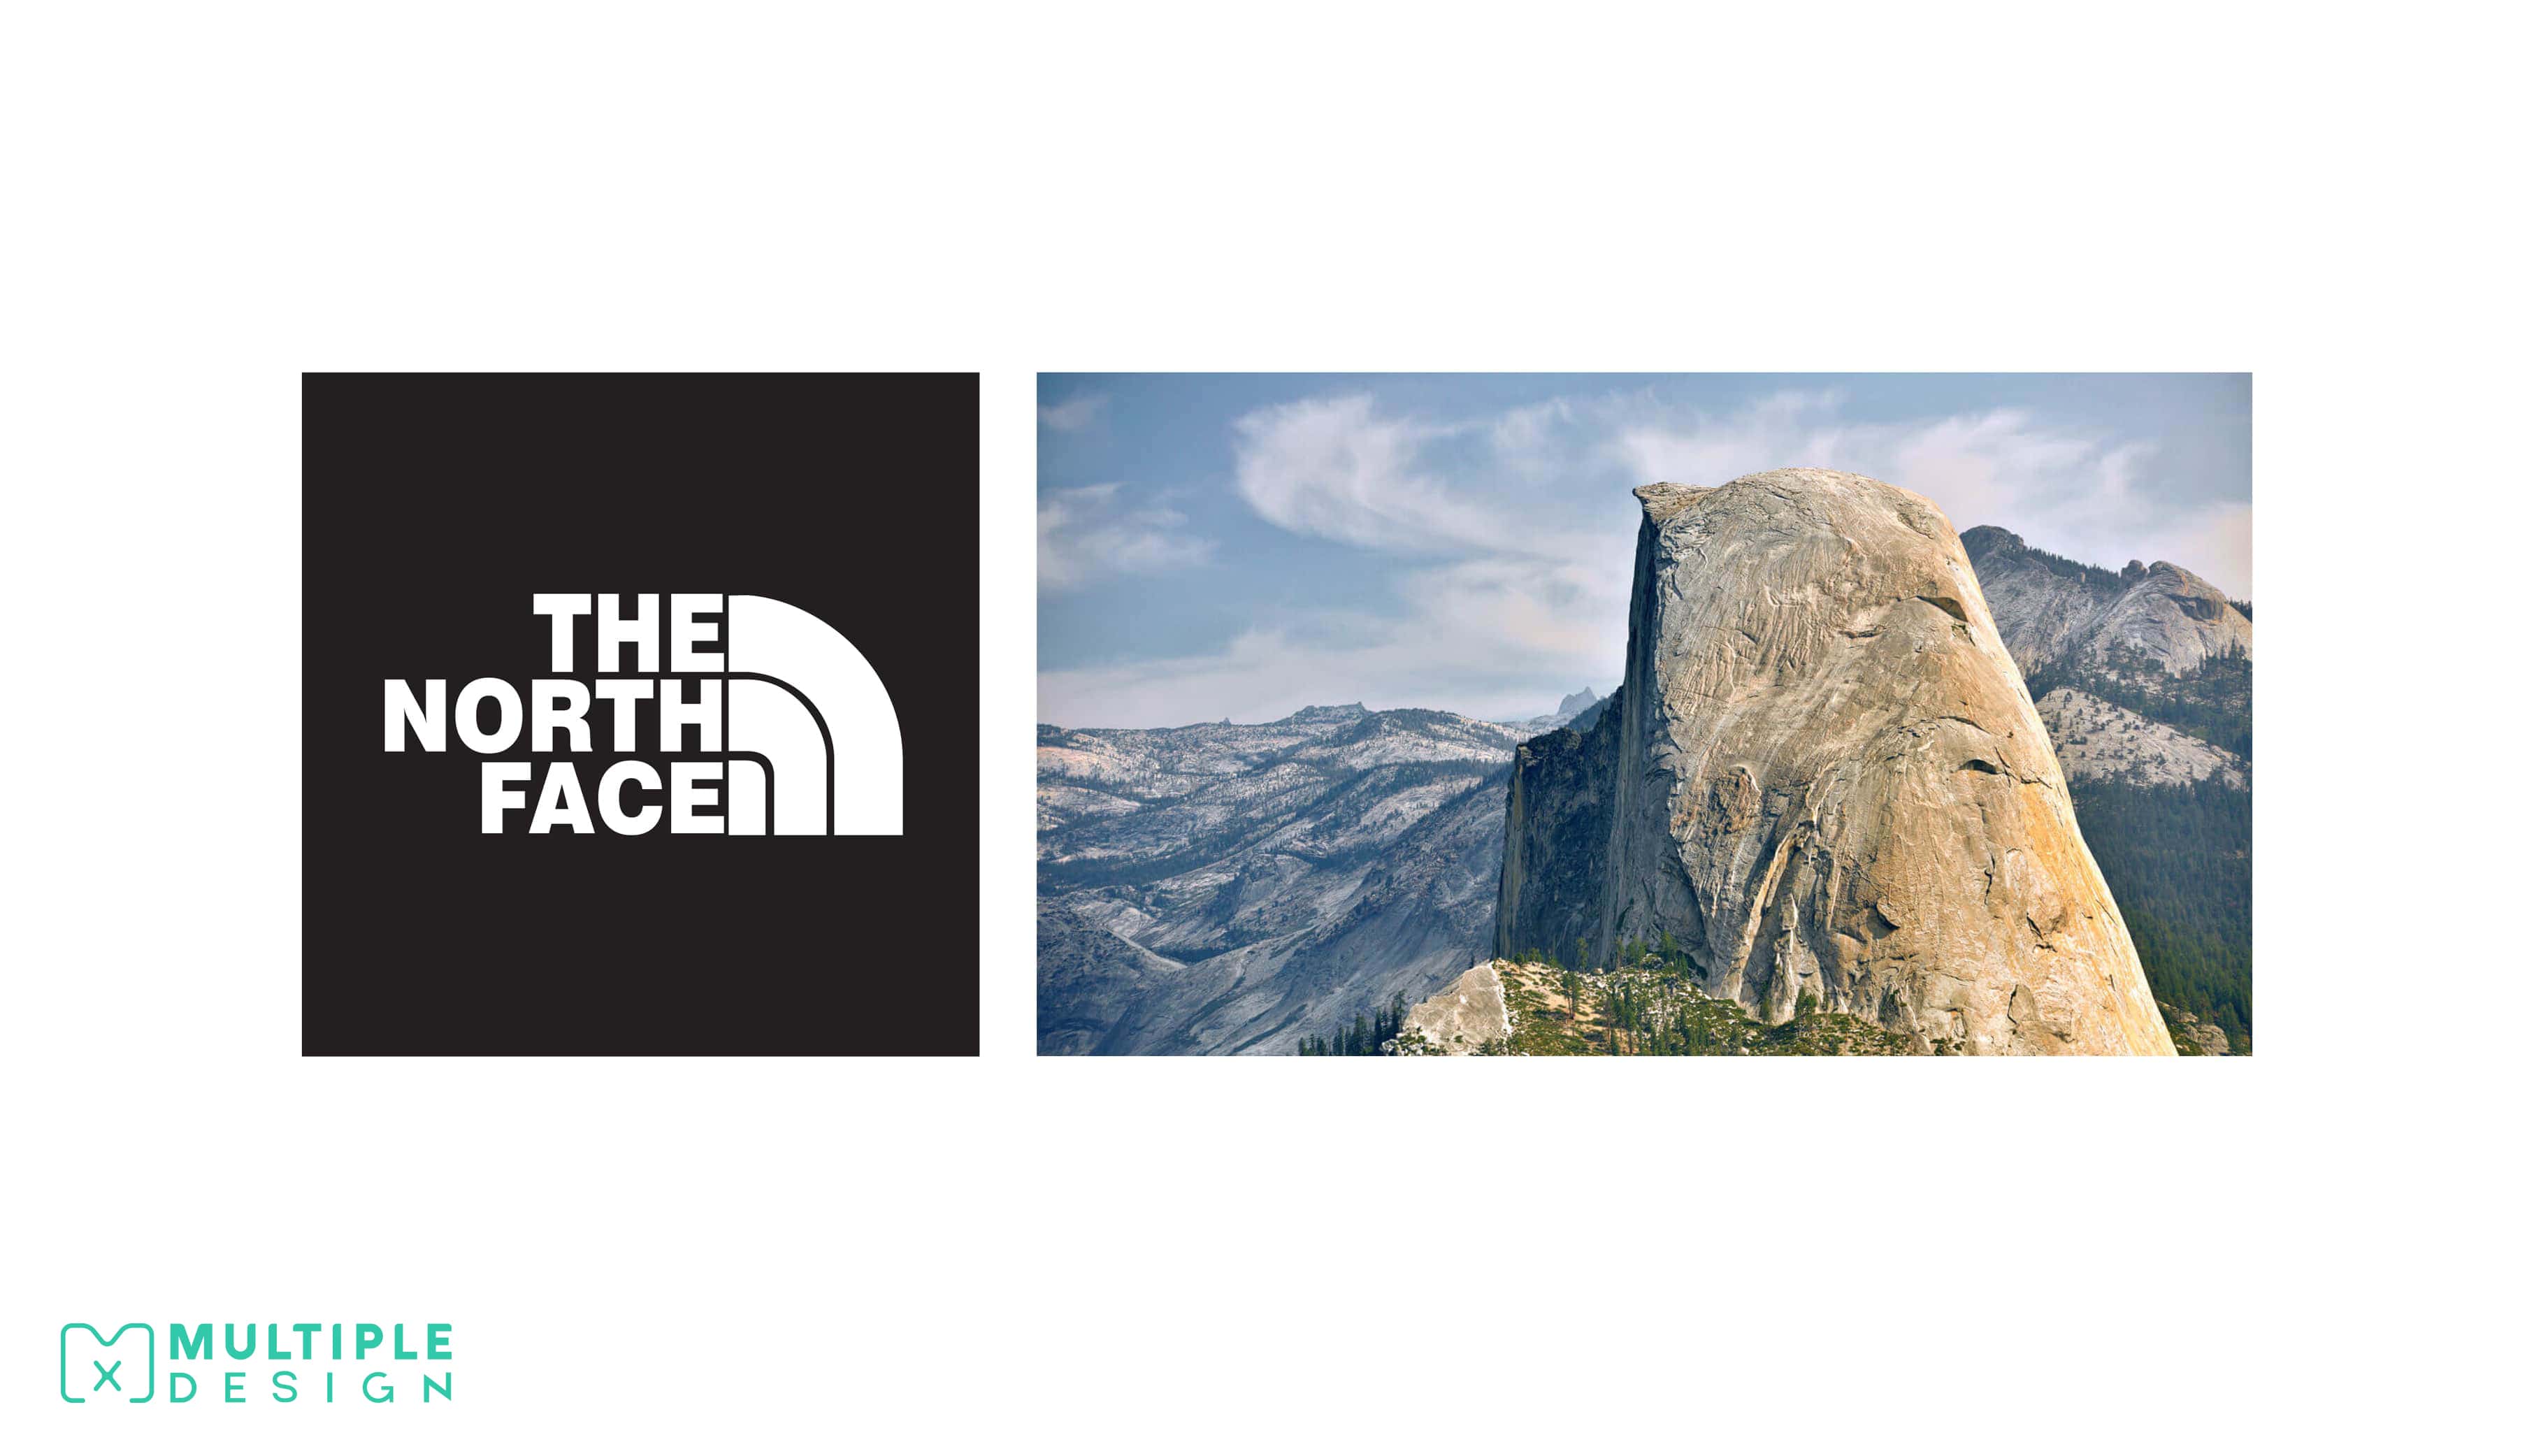 The North Face logo, Half Dome Rock Formation, Yosemite Nations Park